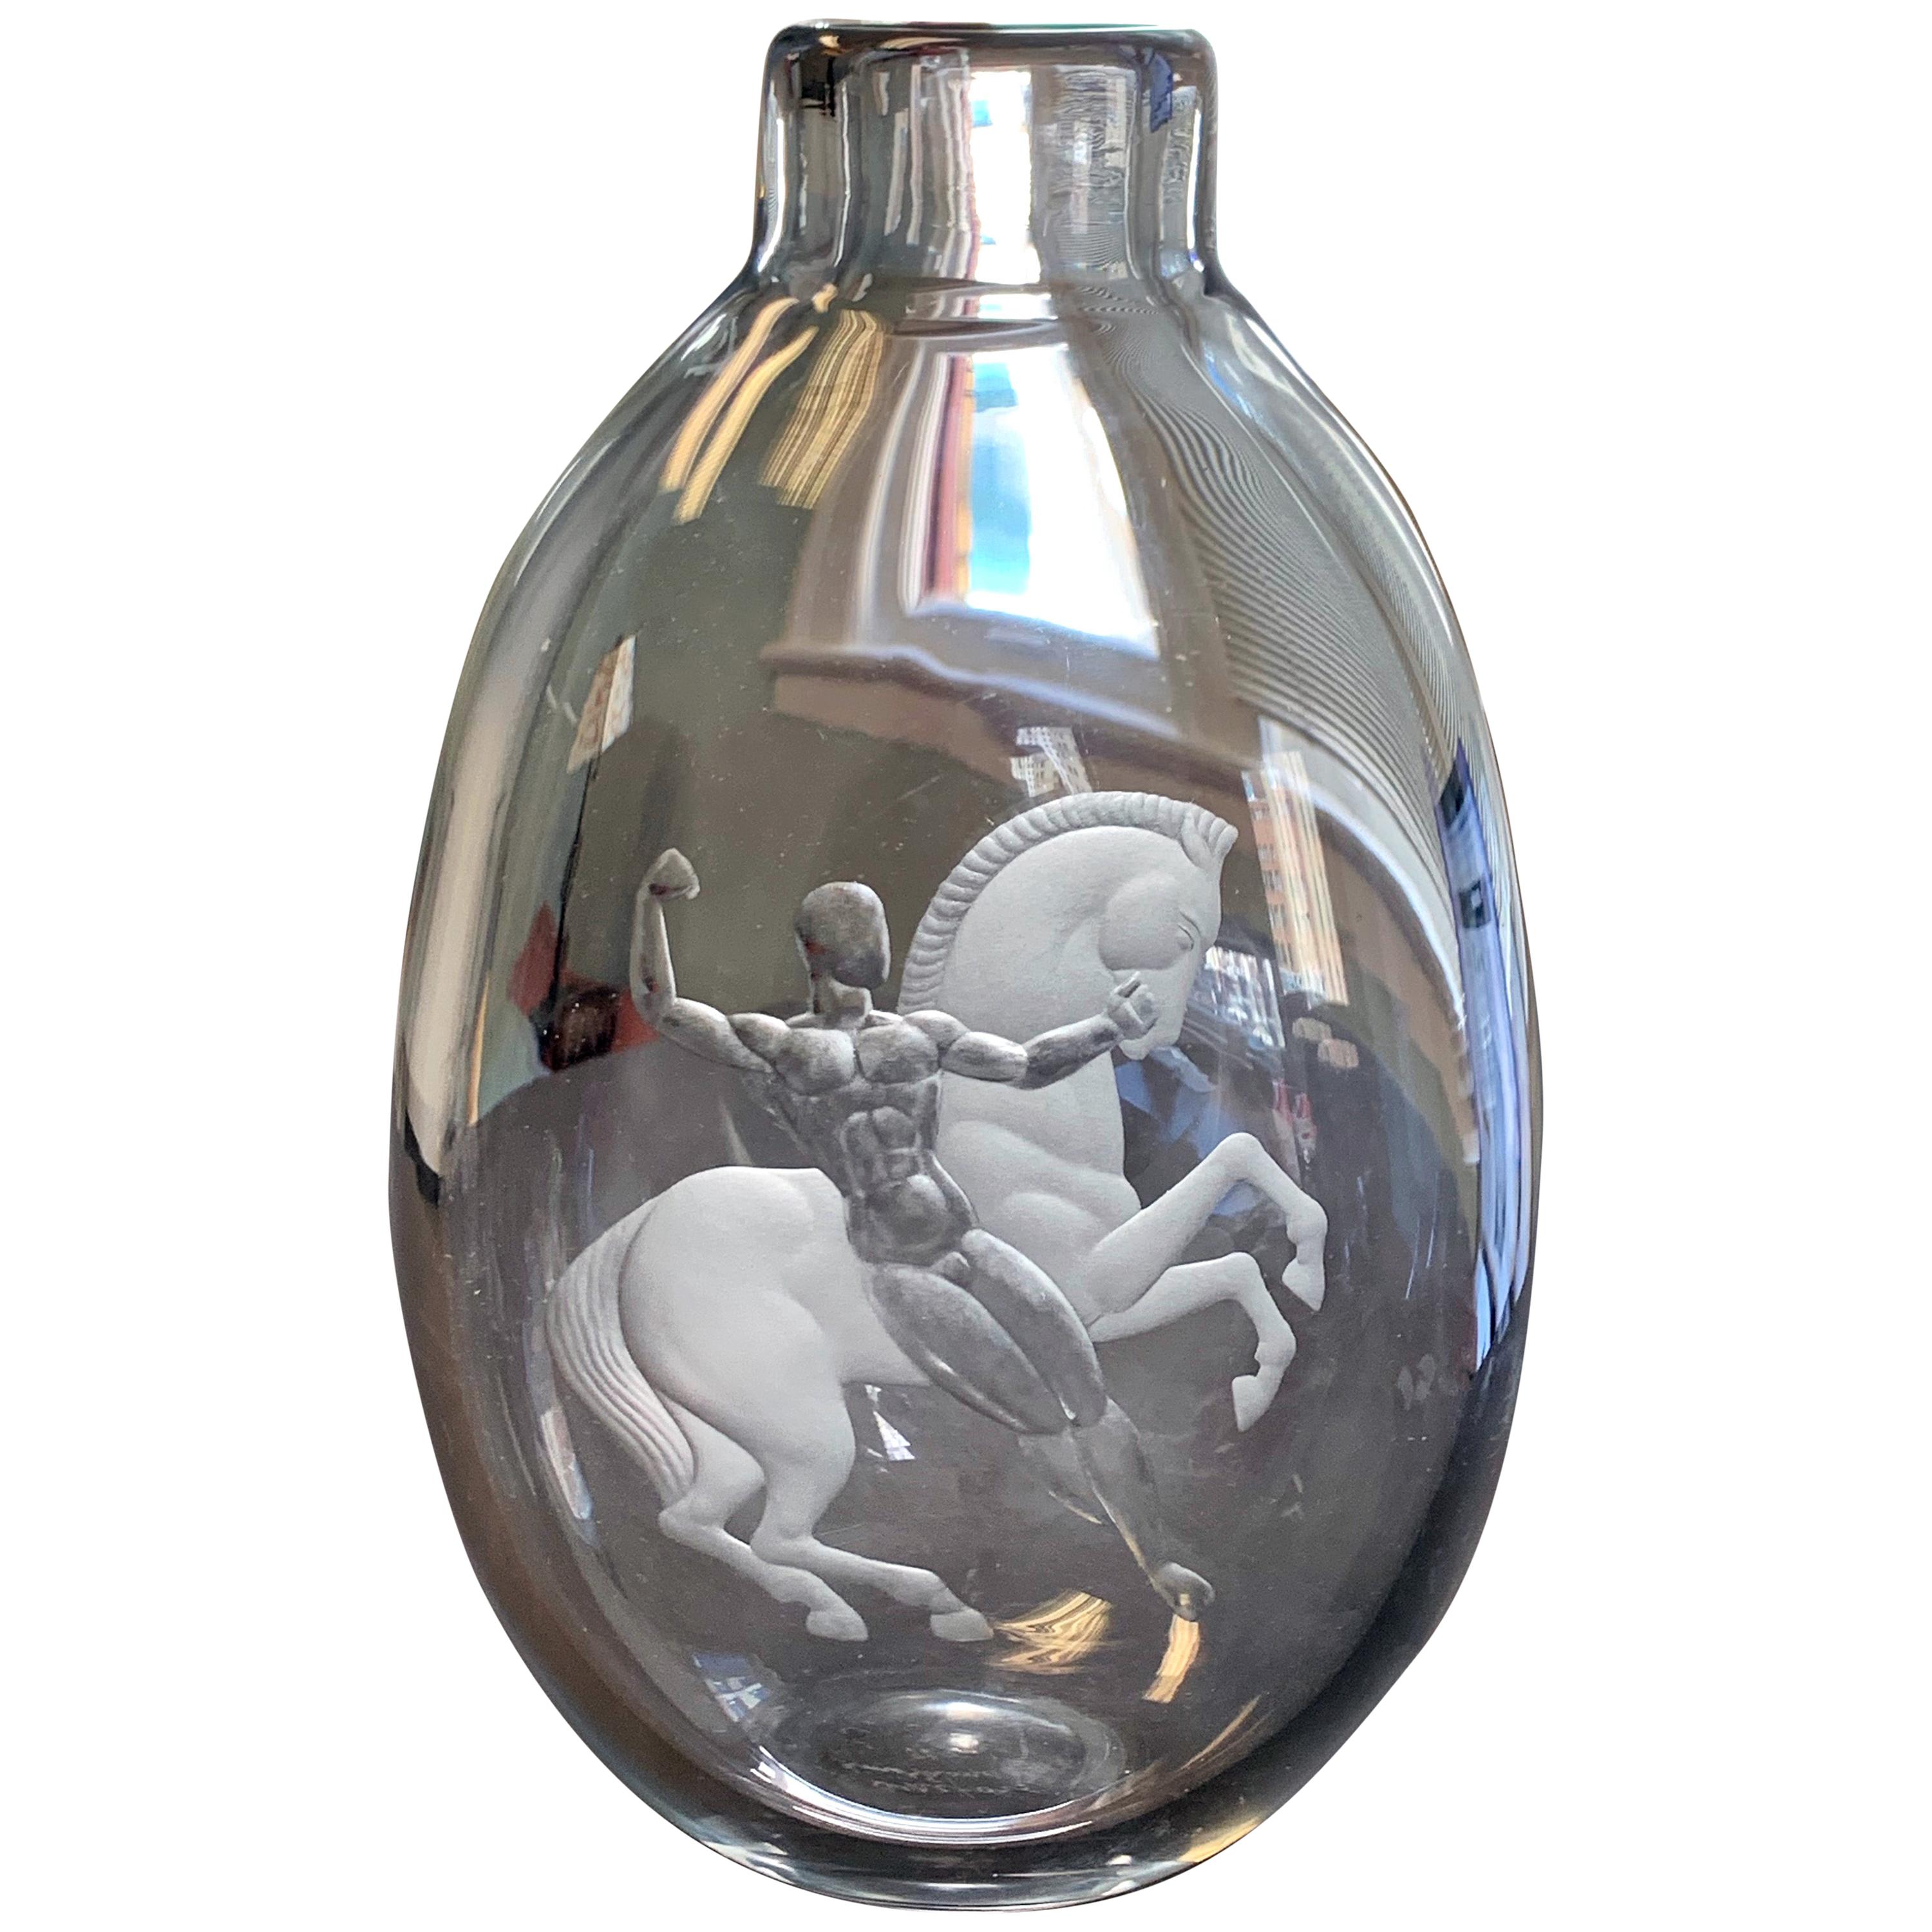 "Bellerophon and Pegasus, " Rare Art Deco Vase with Nude Male by Lindstrand